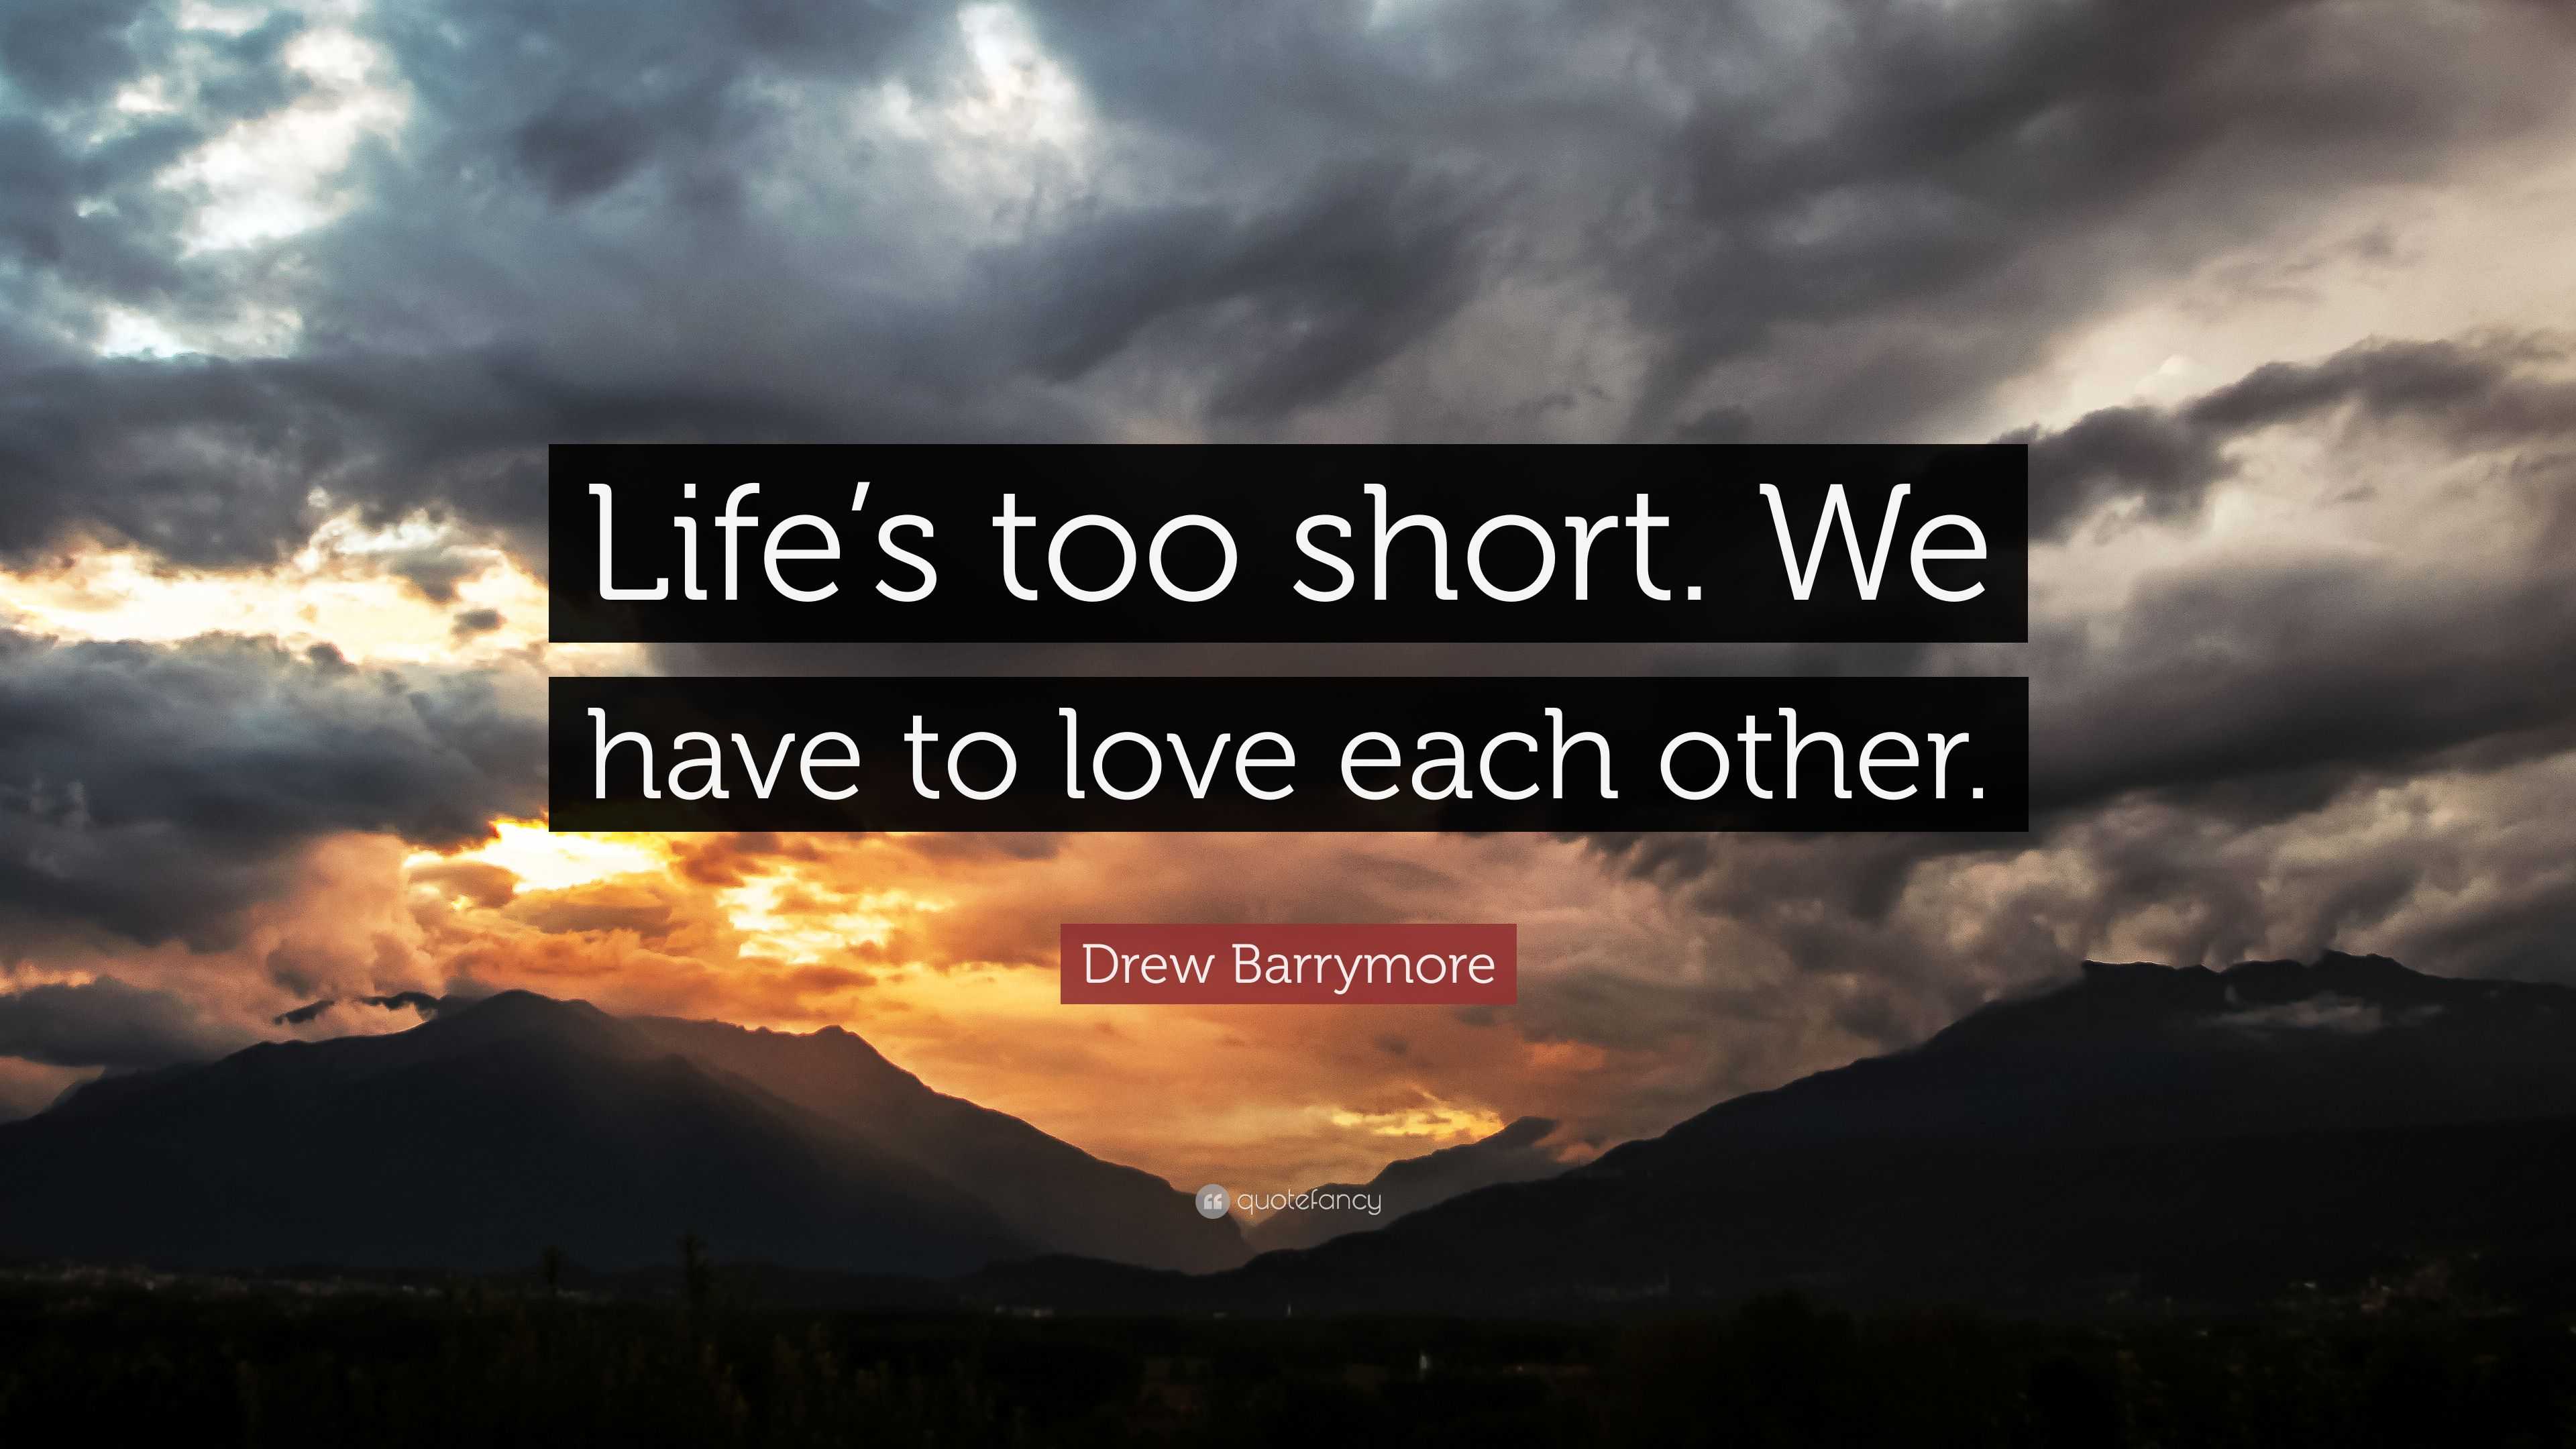 Drew Barrymore Quote: “Life’s too short. We have to love each other.”